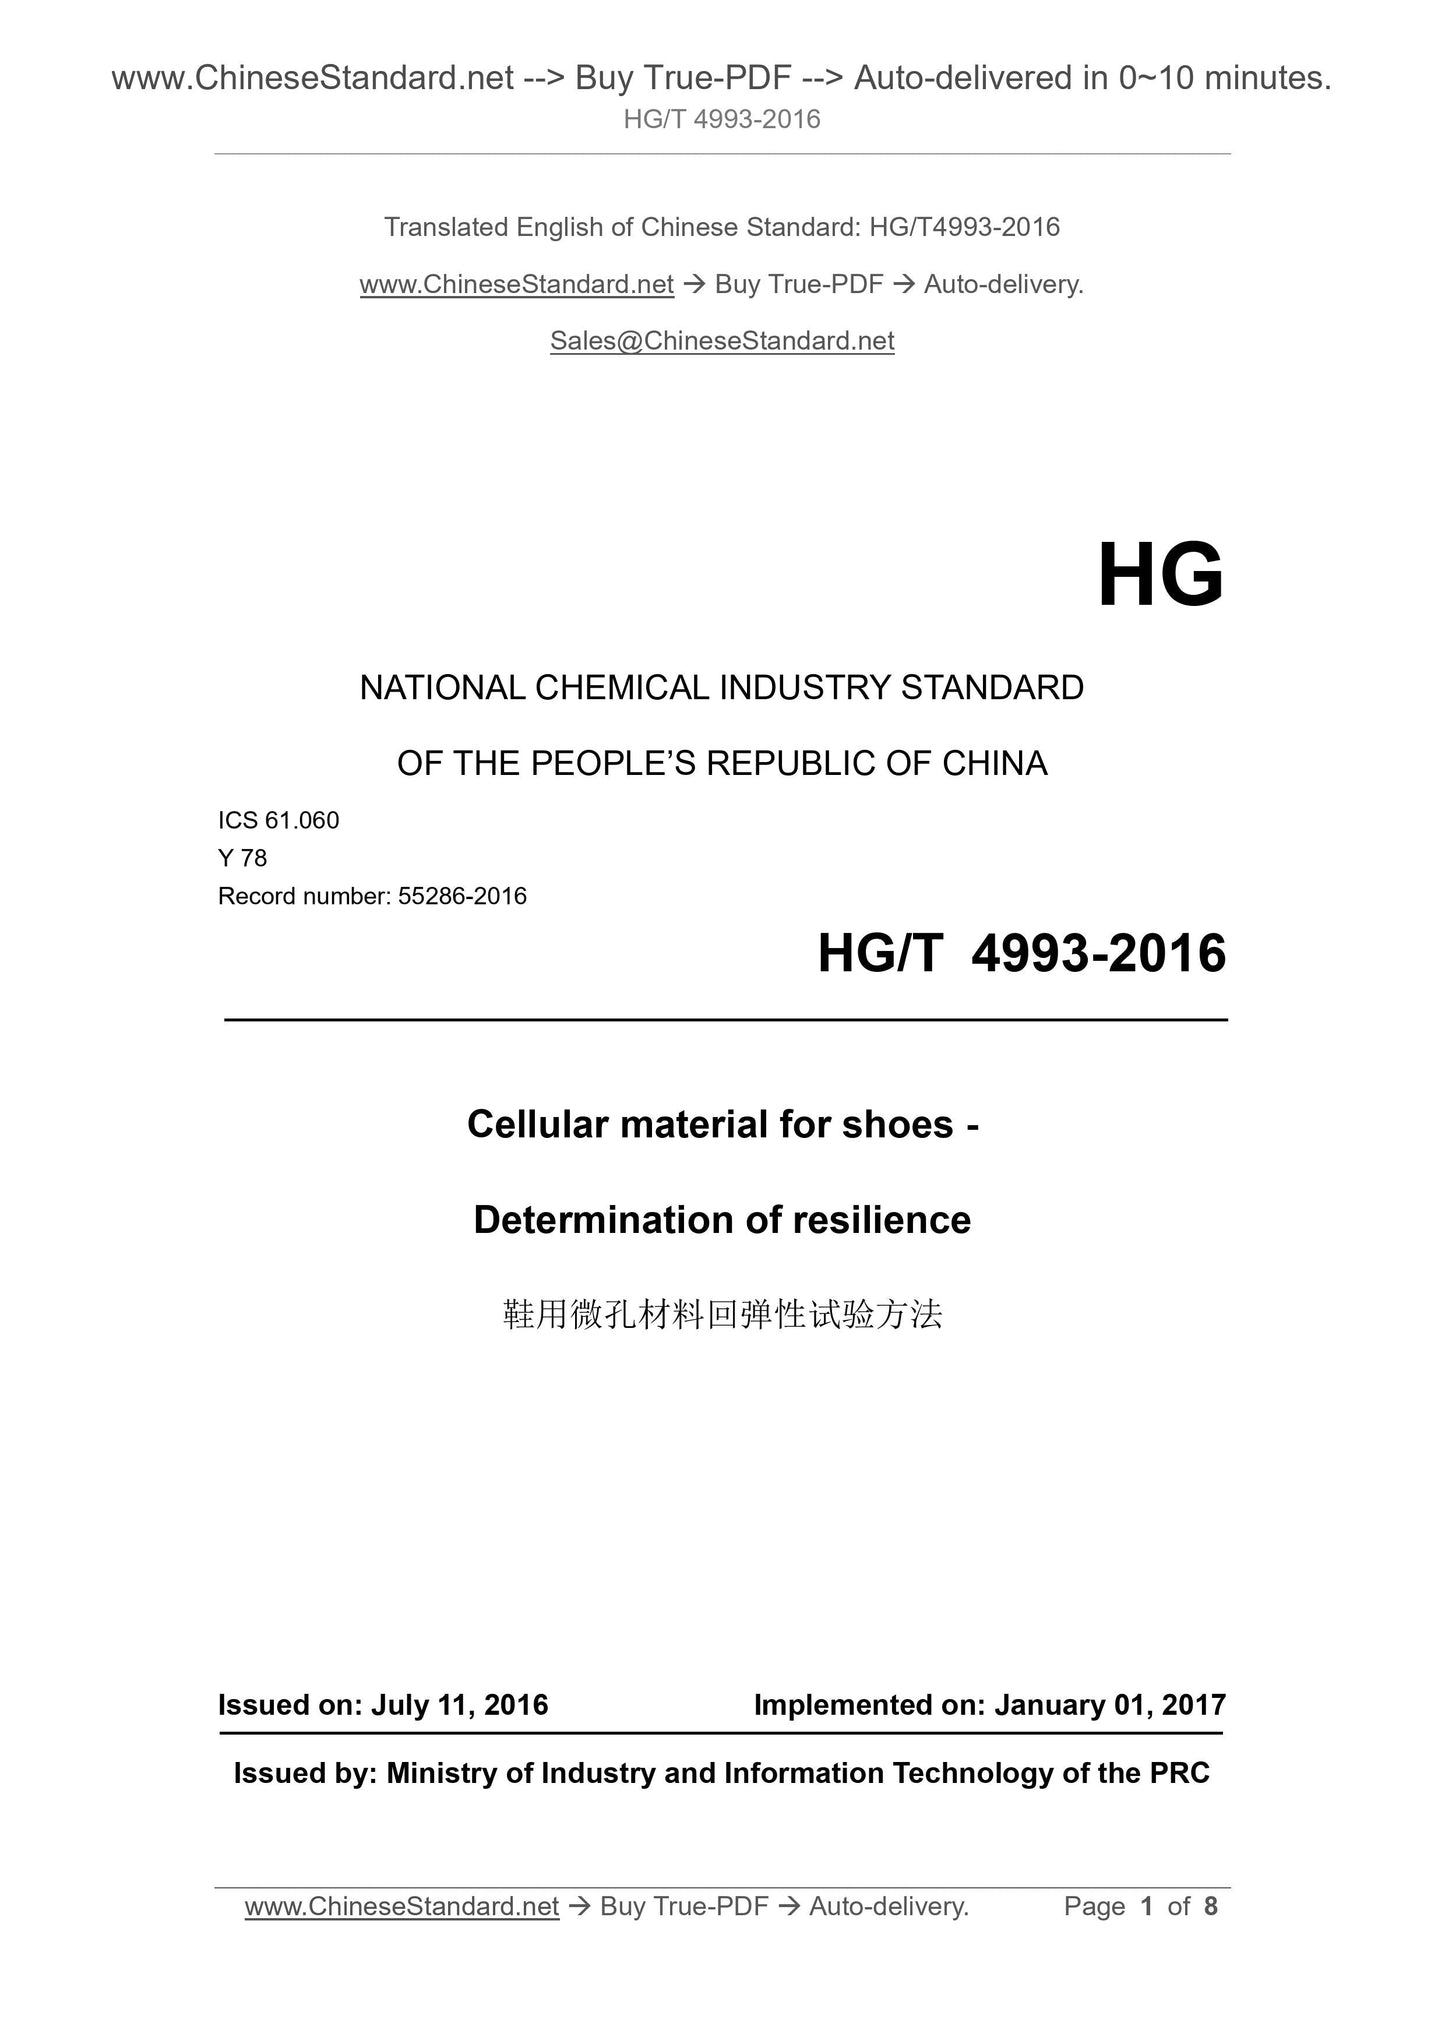 HG/T 4993-2016 Page 1